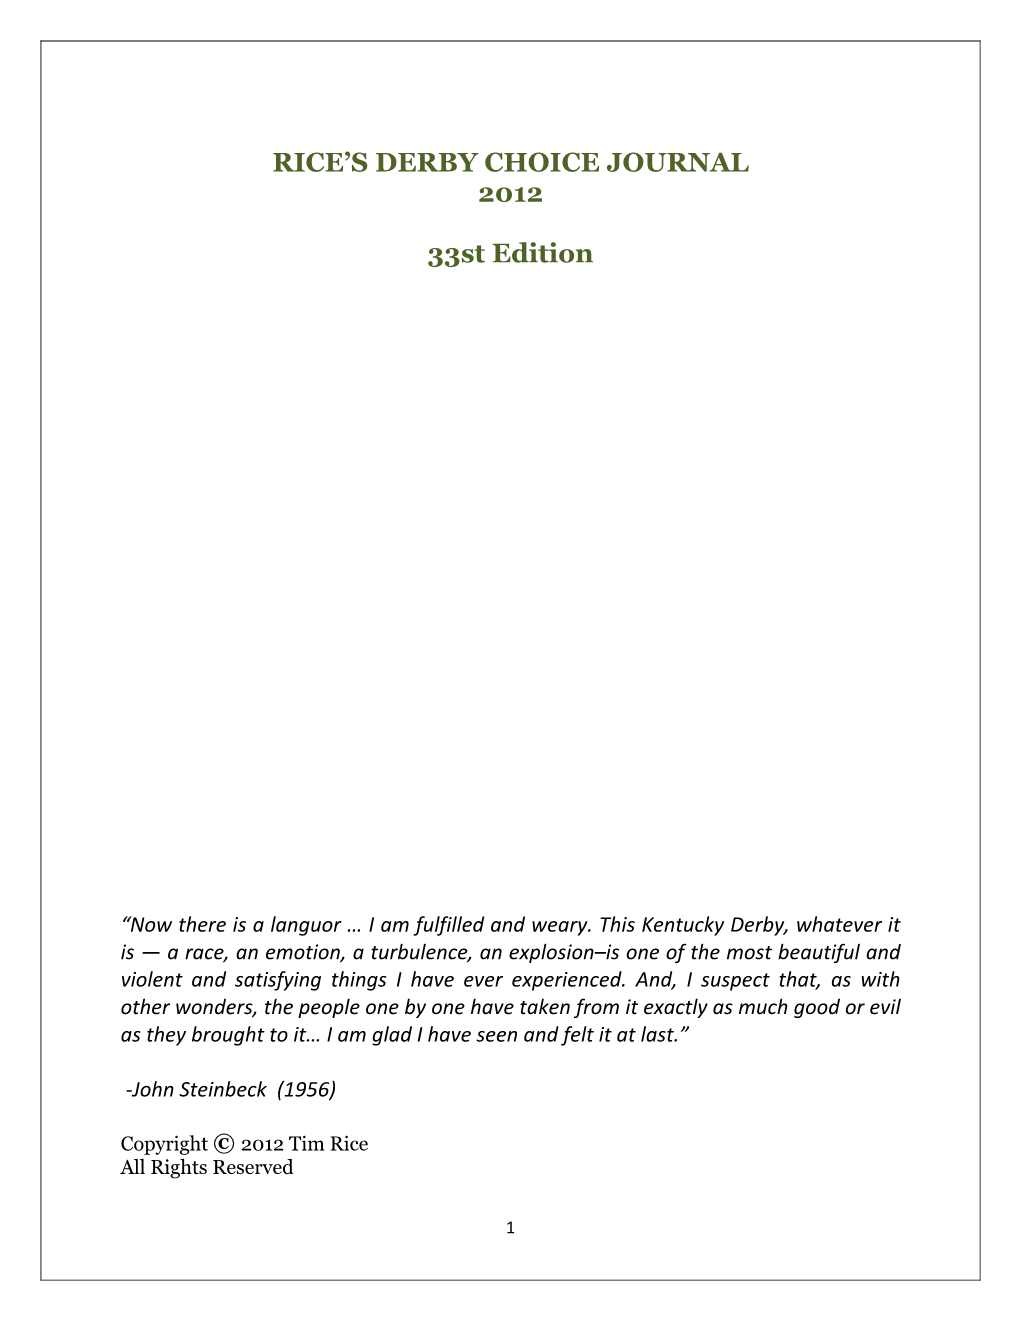 RICE's DERBY CHOICE JOURNAL 2012 33St Edition